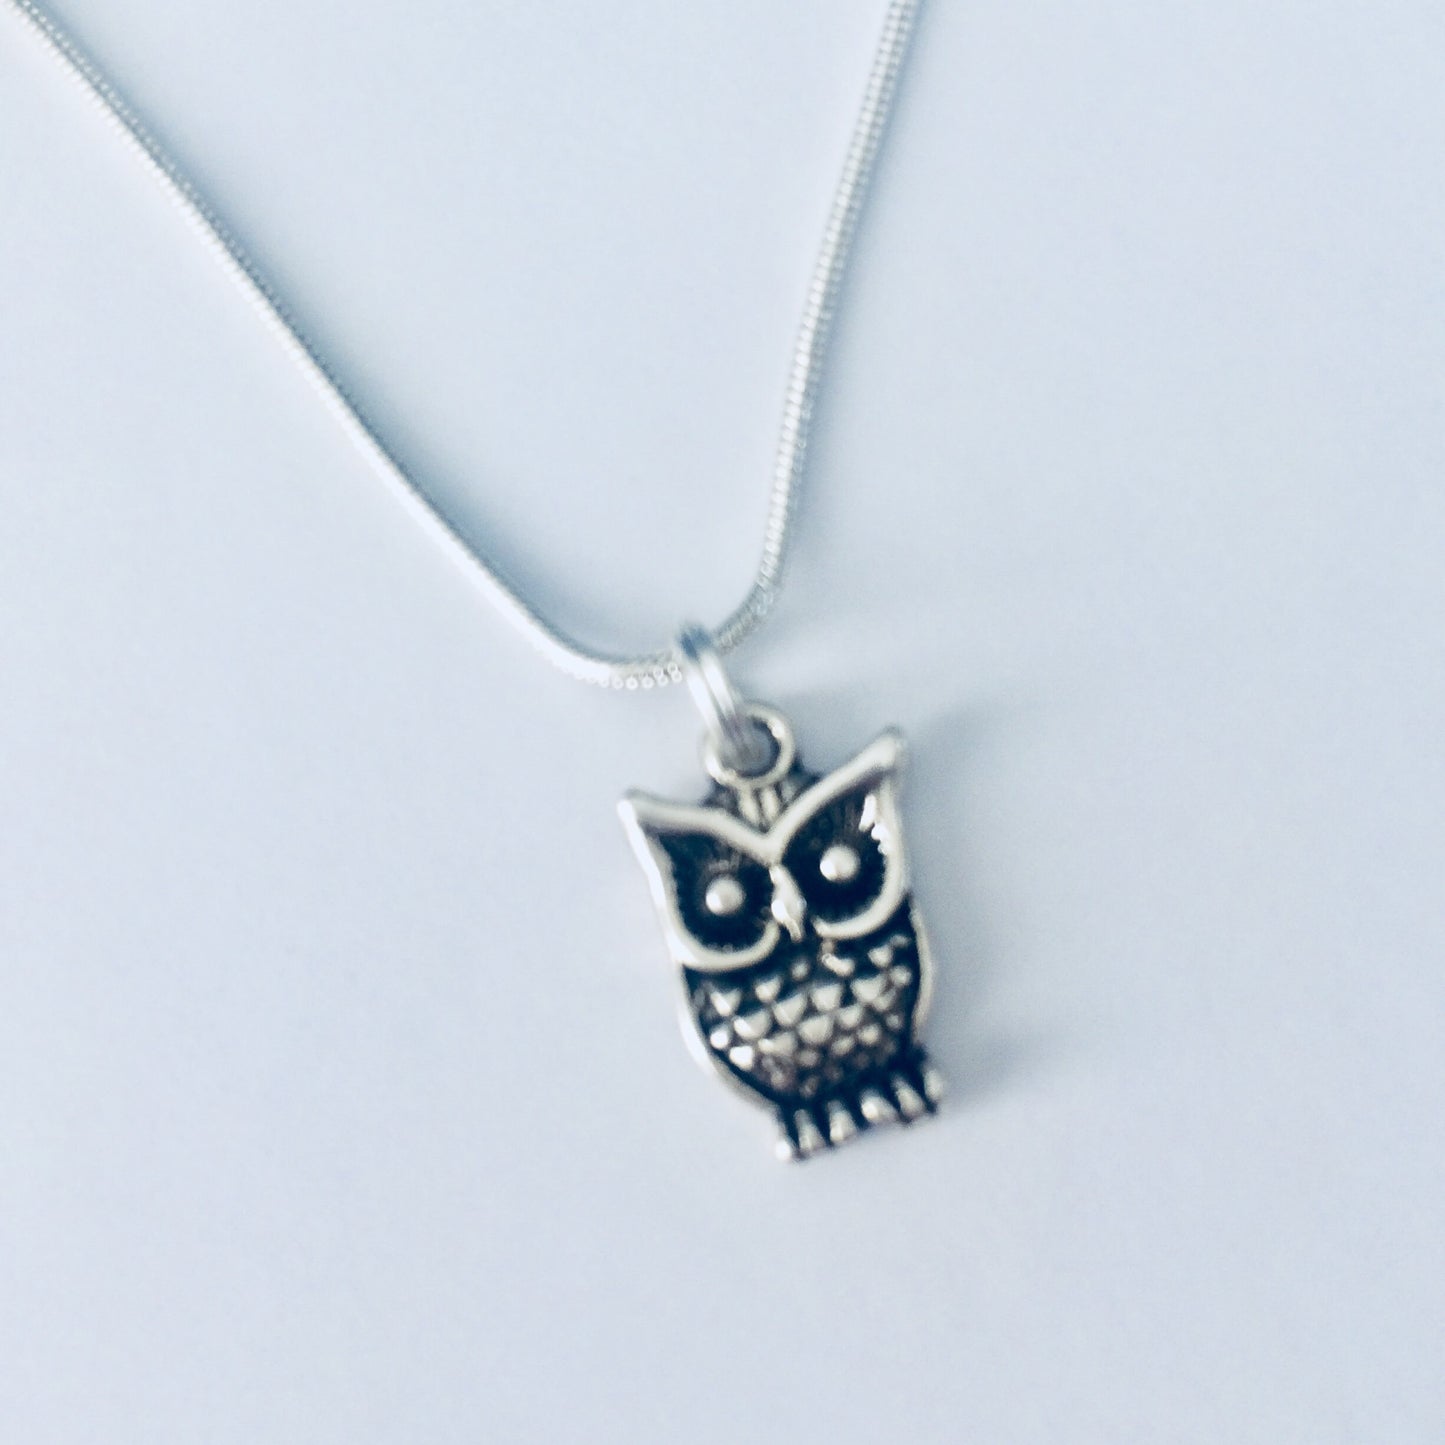 Owl Necklace, Owl Gift Ideas, Owl Lover Pendant, Night Owl, Bird Necklace, Bird Pendant, Nocturnal Person, Bird Lover Gifts, Owl Sanctuary.